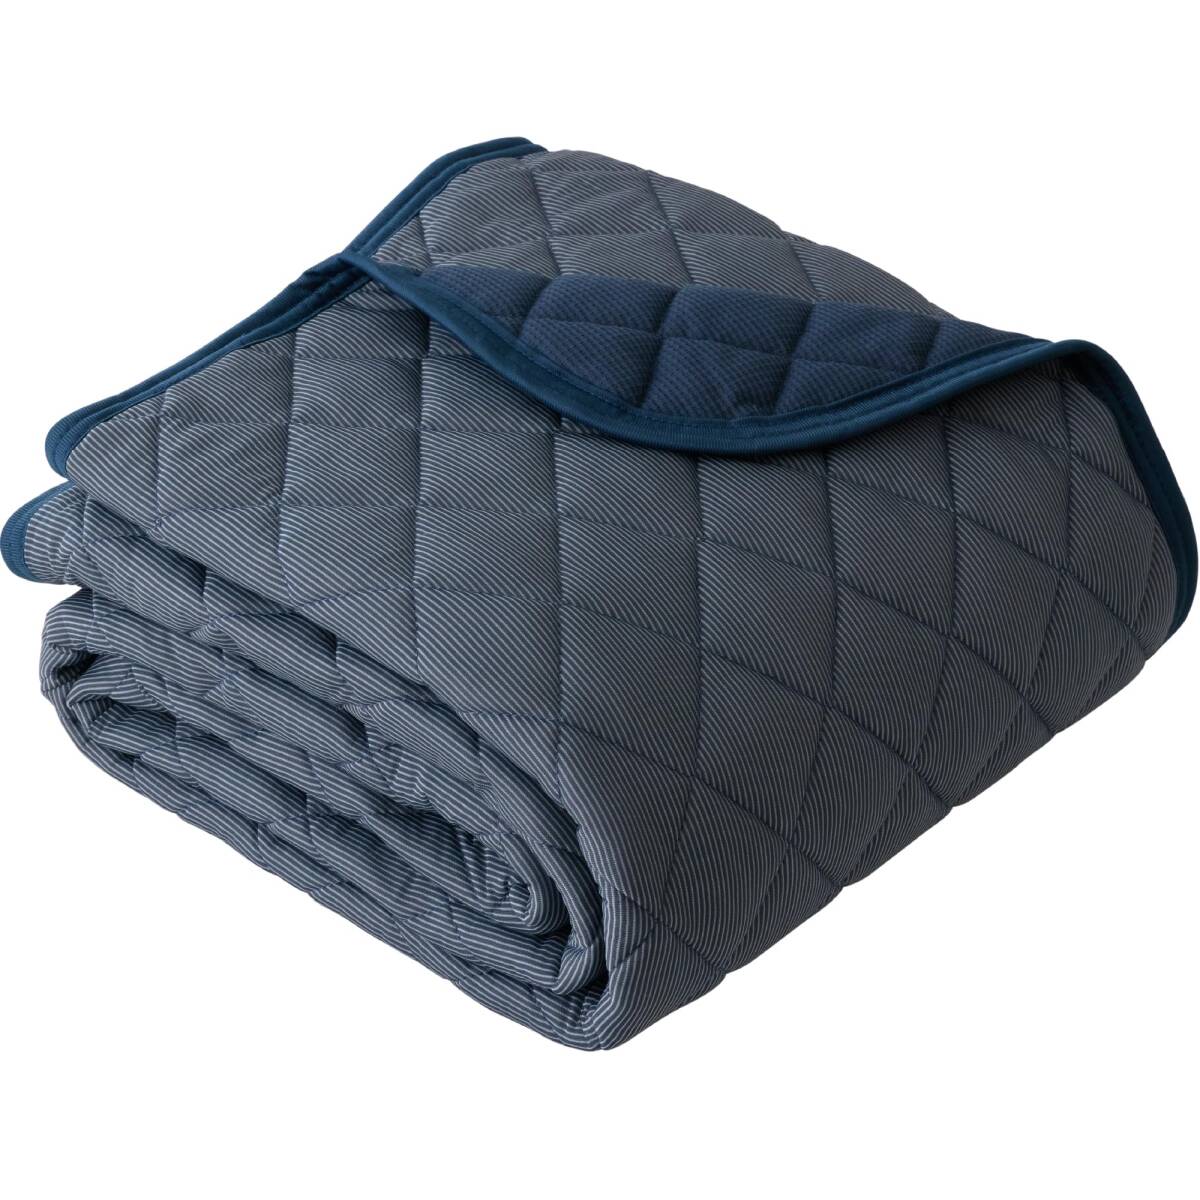 AQUA( aqua ) bed pad autumn all season semi-double indigo navy .. suddenly reversible one annual possible to use long possible to use ....